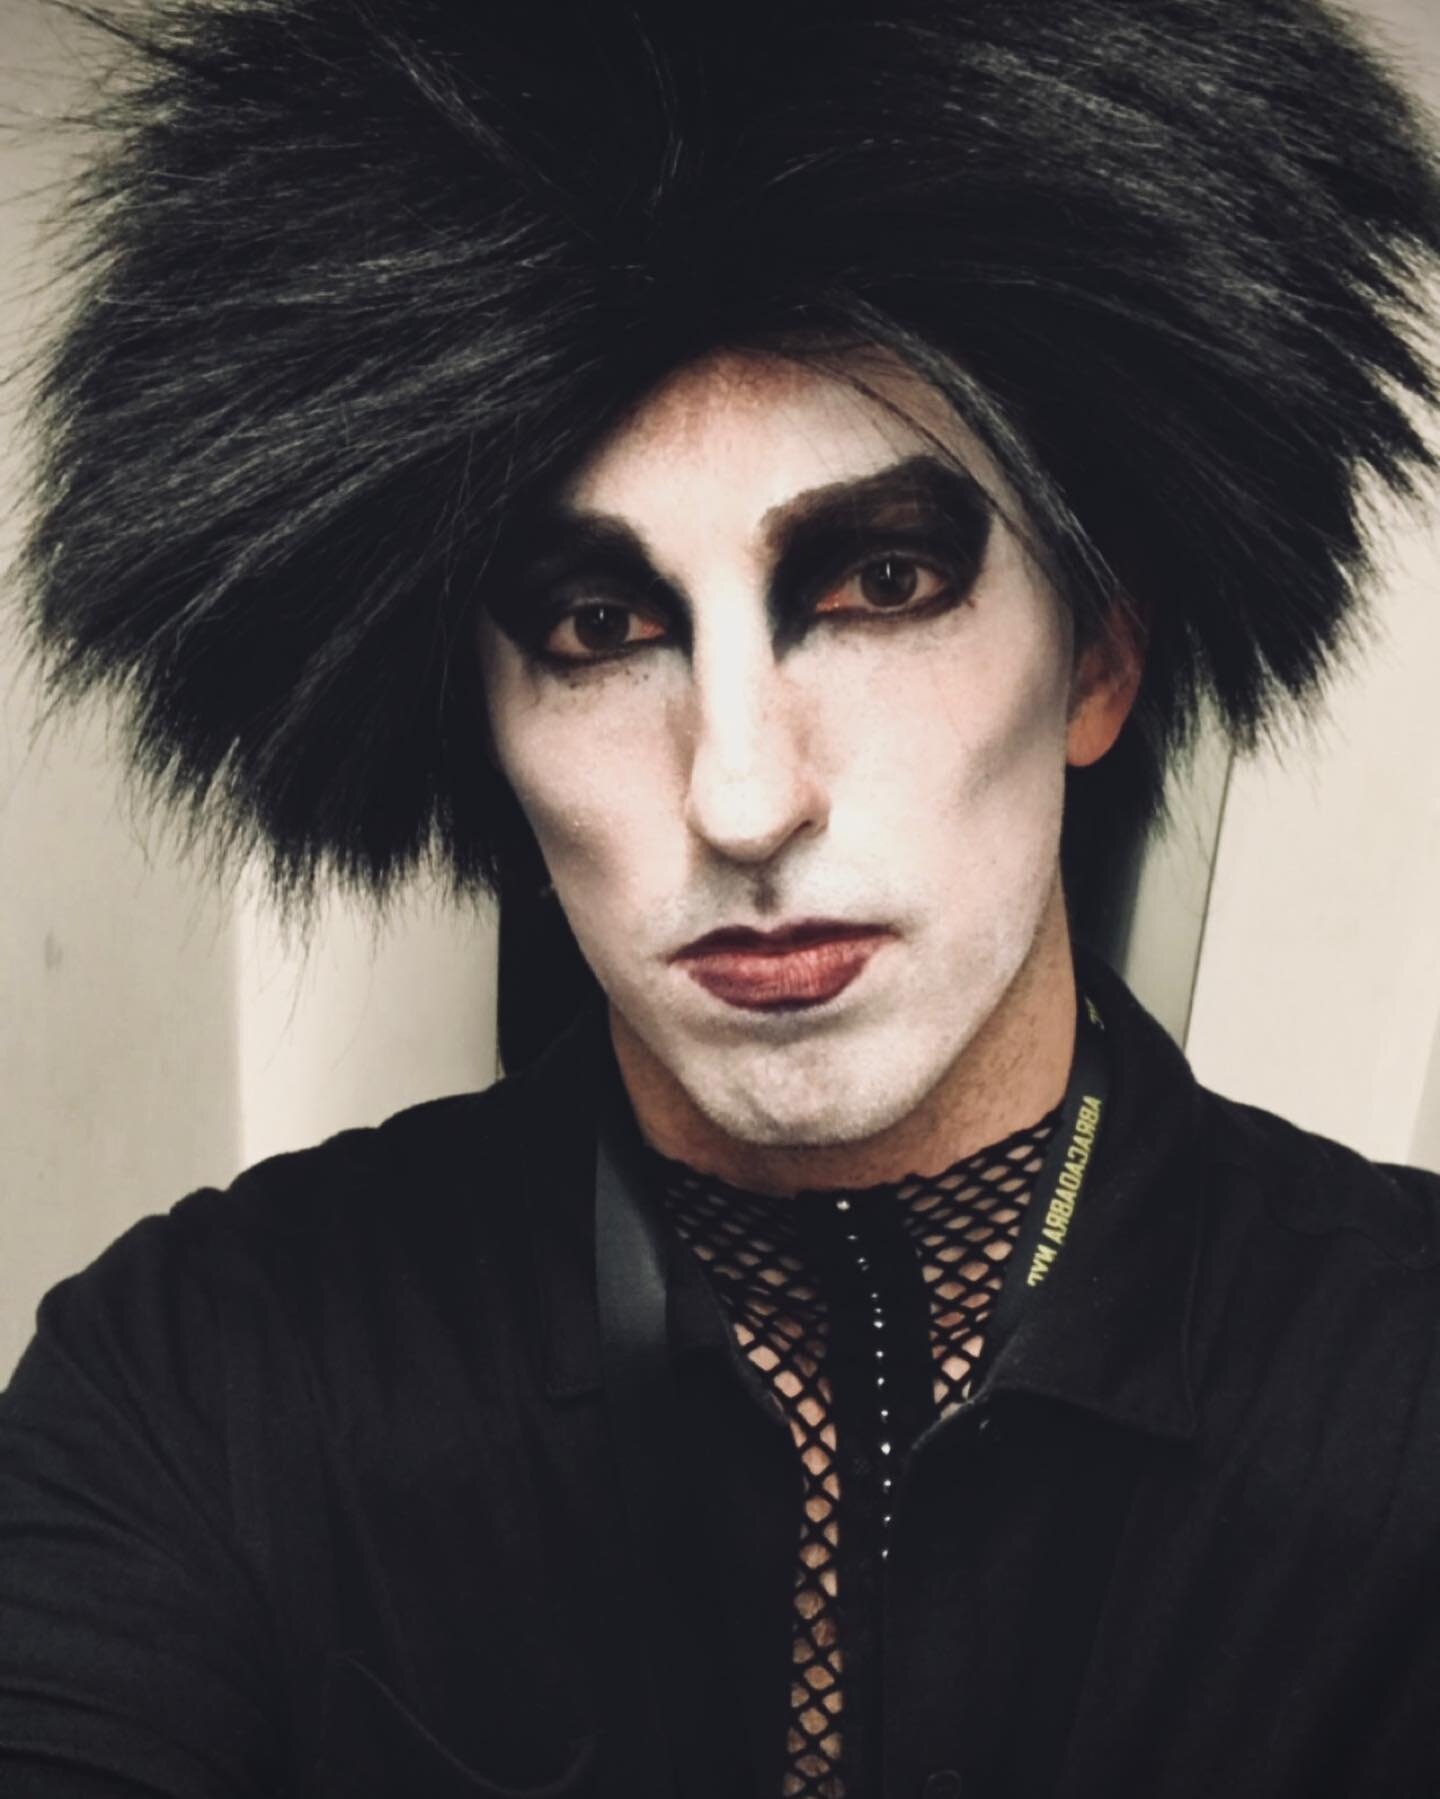 Happy halloween 2023 from your fav goth at @abracadabranyc 
Makeup by @jackienicoleartistry 
.
.
.
.
.
.
.
.
.
.
.
.
#halloween #happyhalloween #halloweencostume #1031 #goth #tradgoth #traditionalgoth #siouxsie #siousxieandthebanshees #abracadabra #a